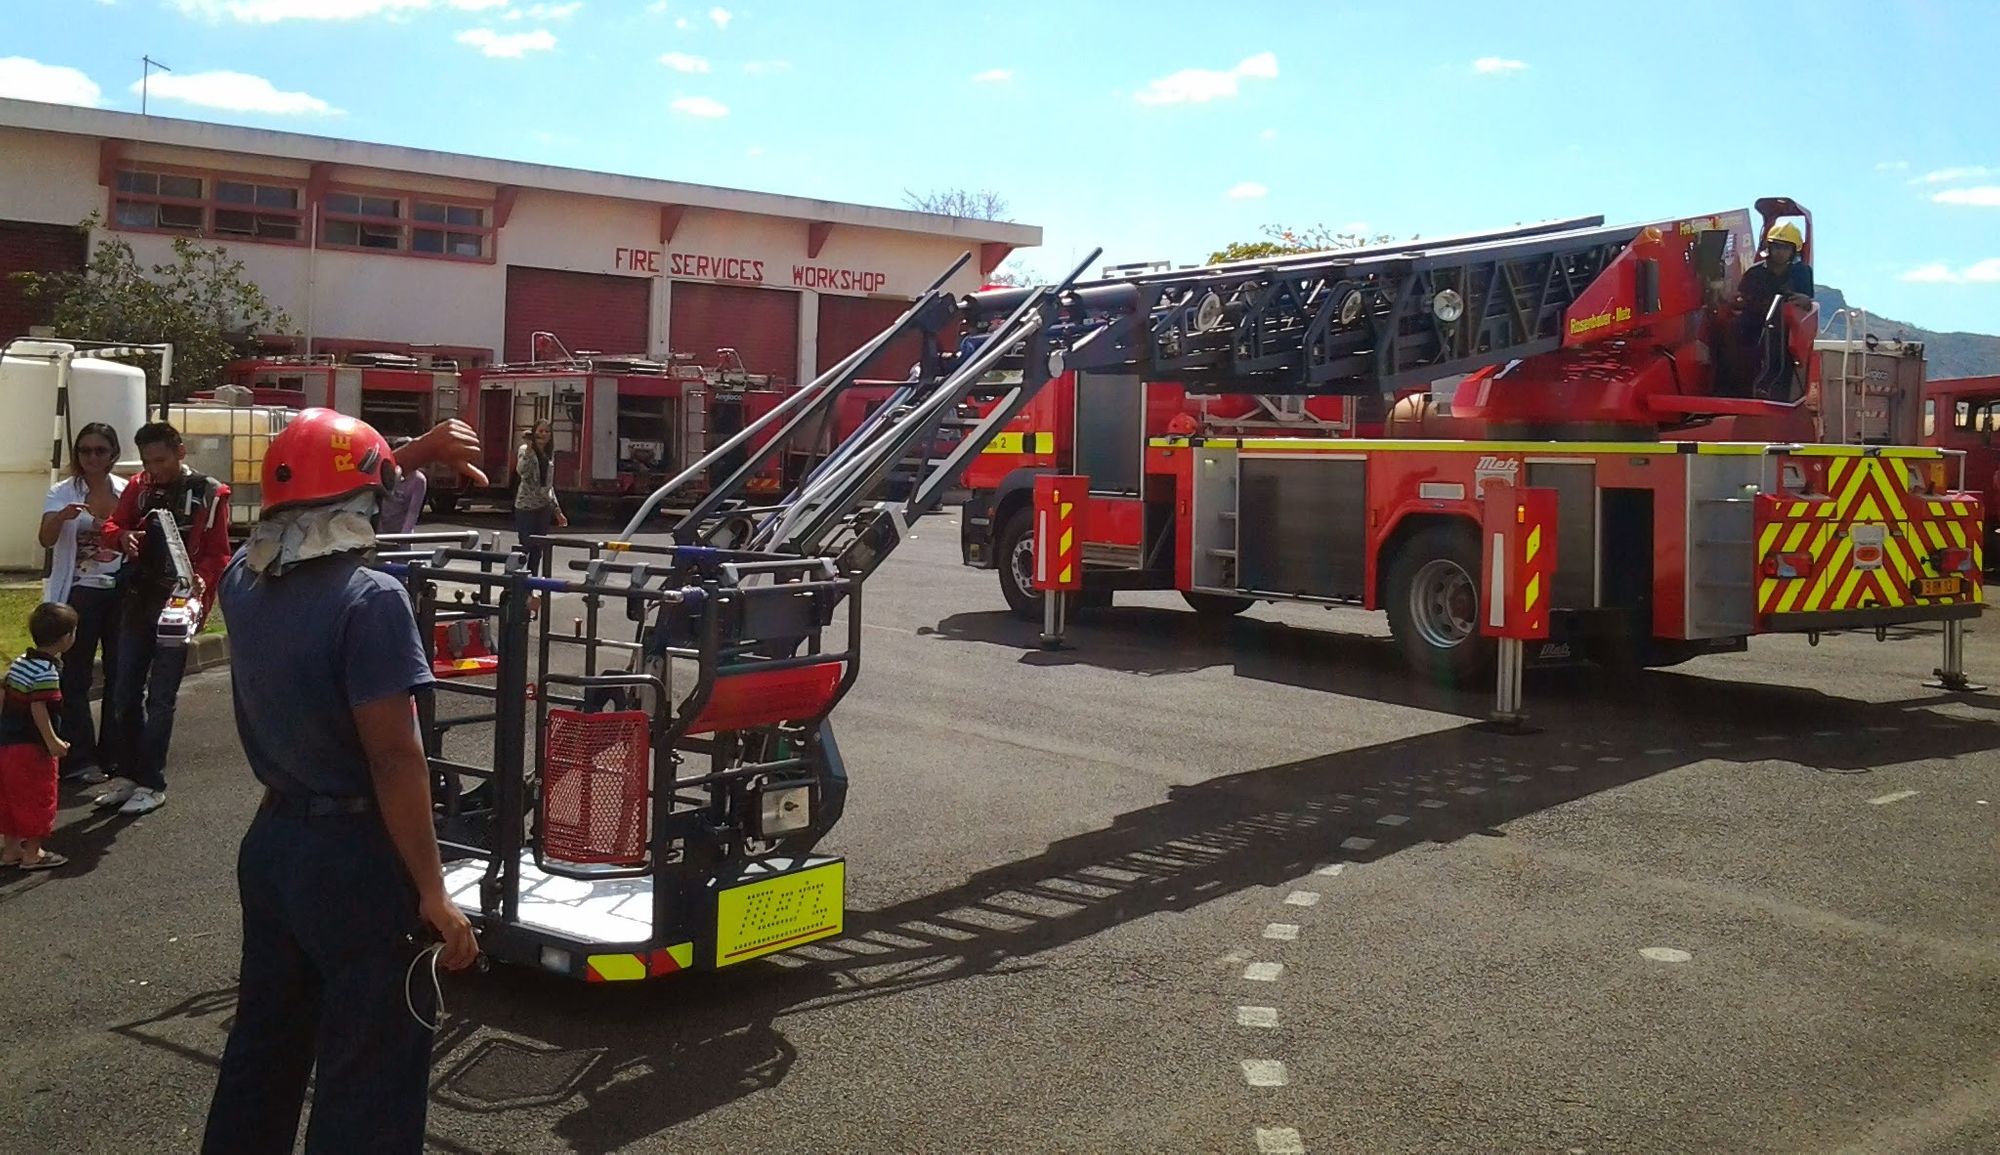 Visiting the Fire Station in Coromandel